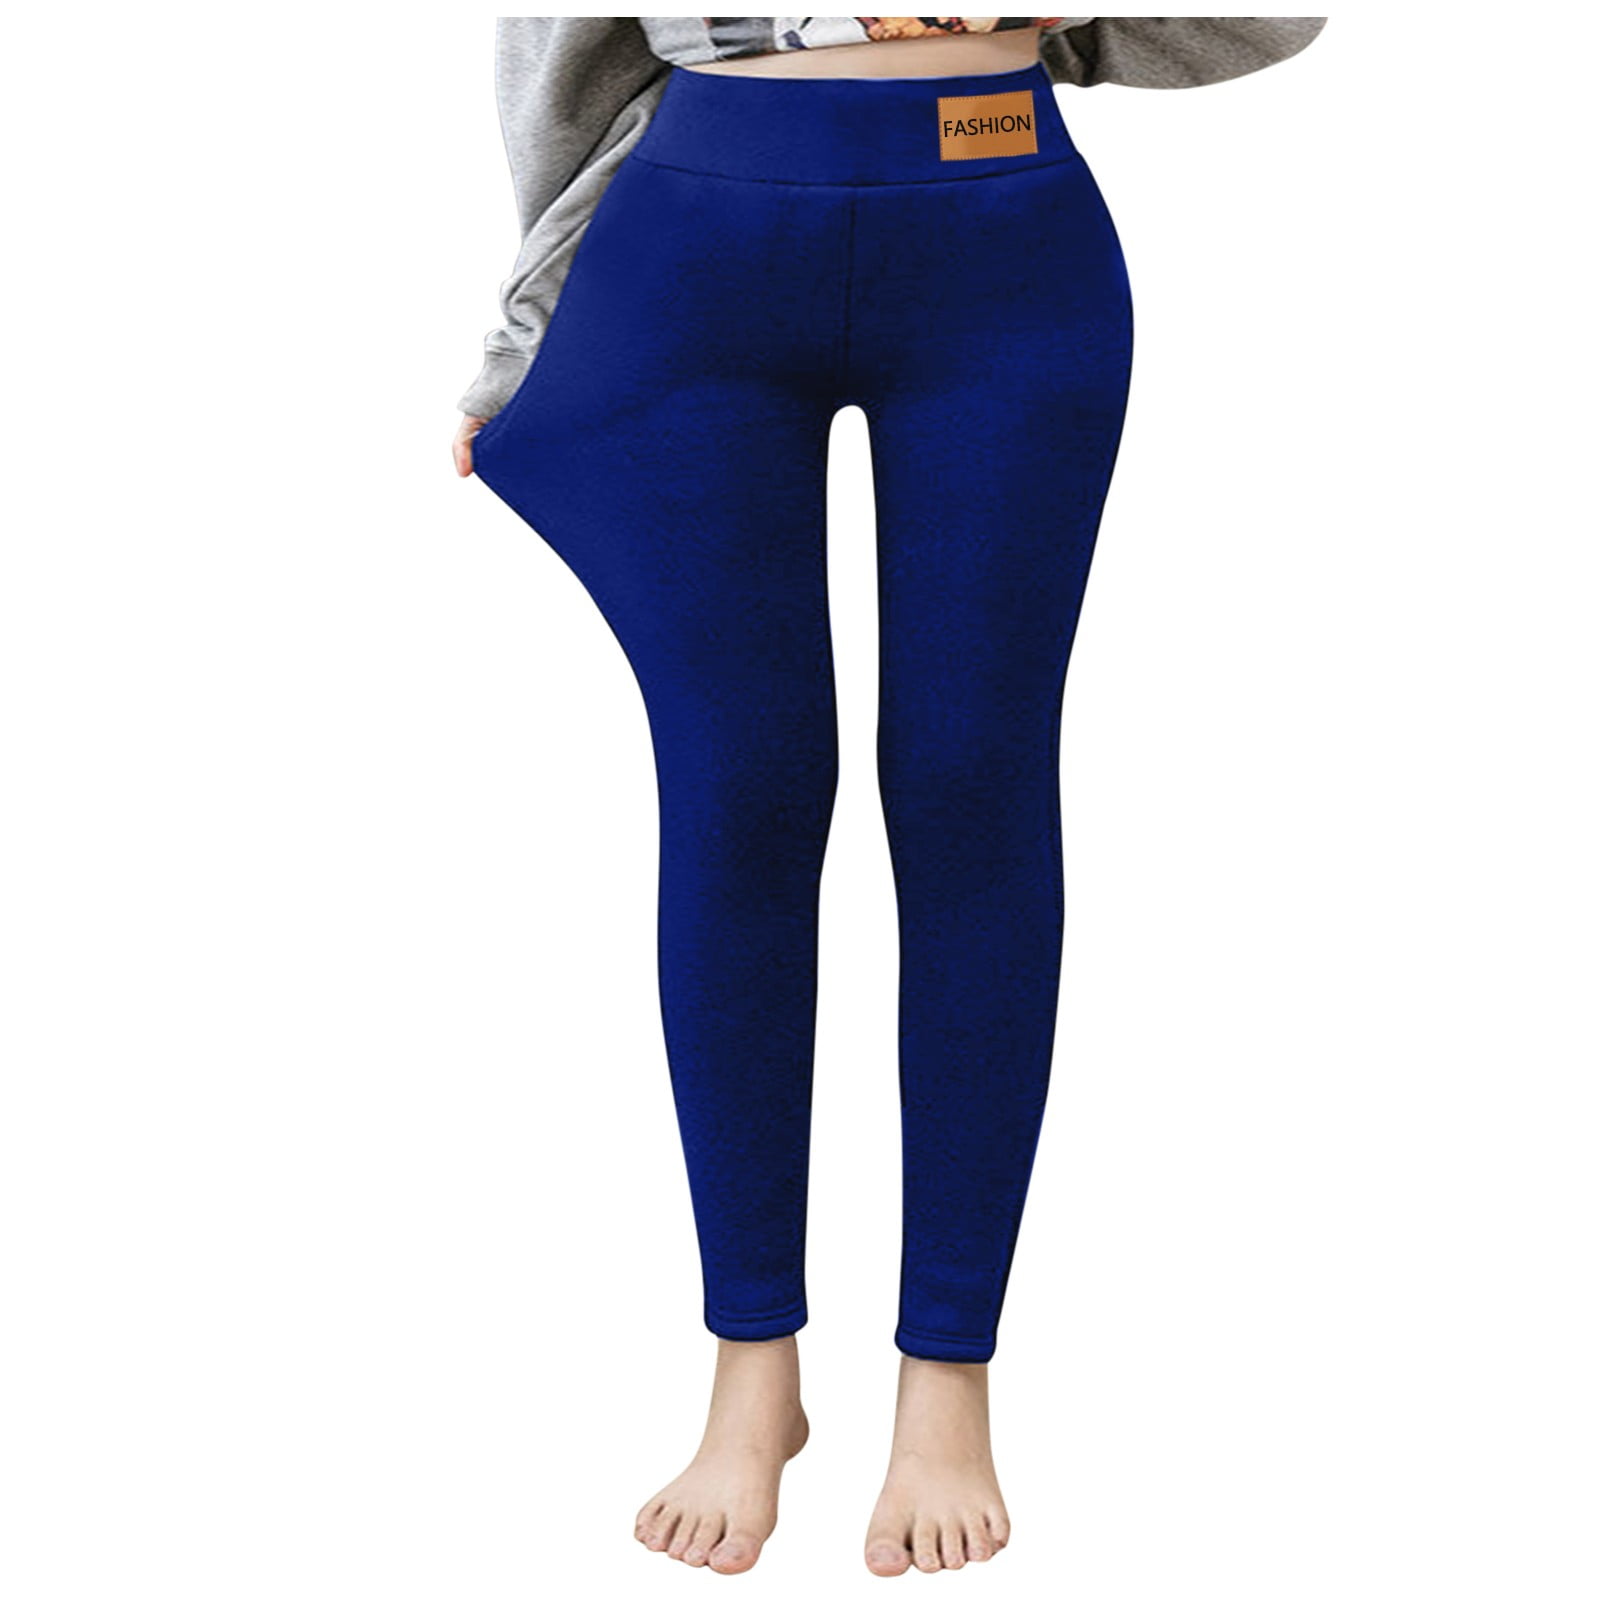 B91xZ Plus Size Leggings For Women,High Waisted Leggings for Women - Soft  Athletic Tummy Control Pants for Running Cycling Yoga Workout - Reg & Plus  Size Navy,XL - Walmart.com